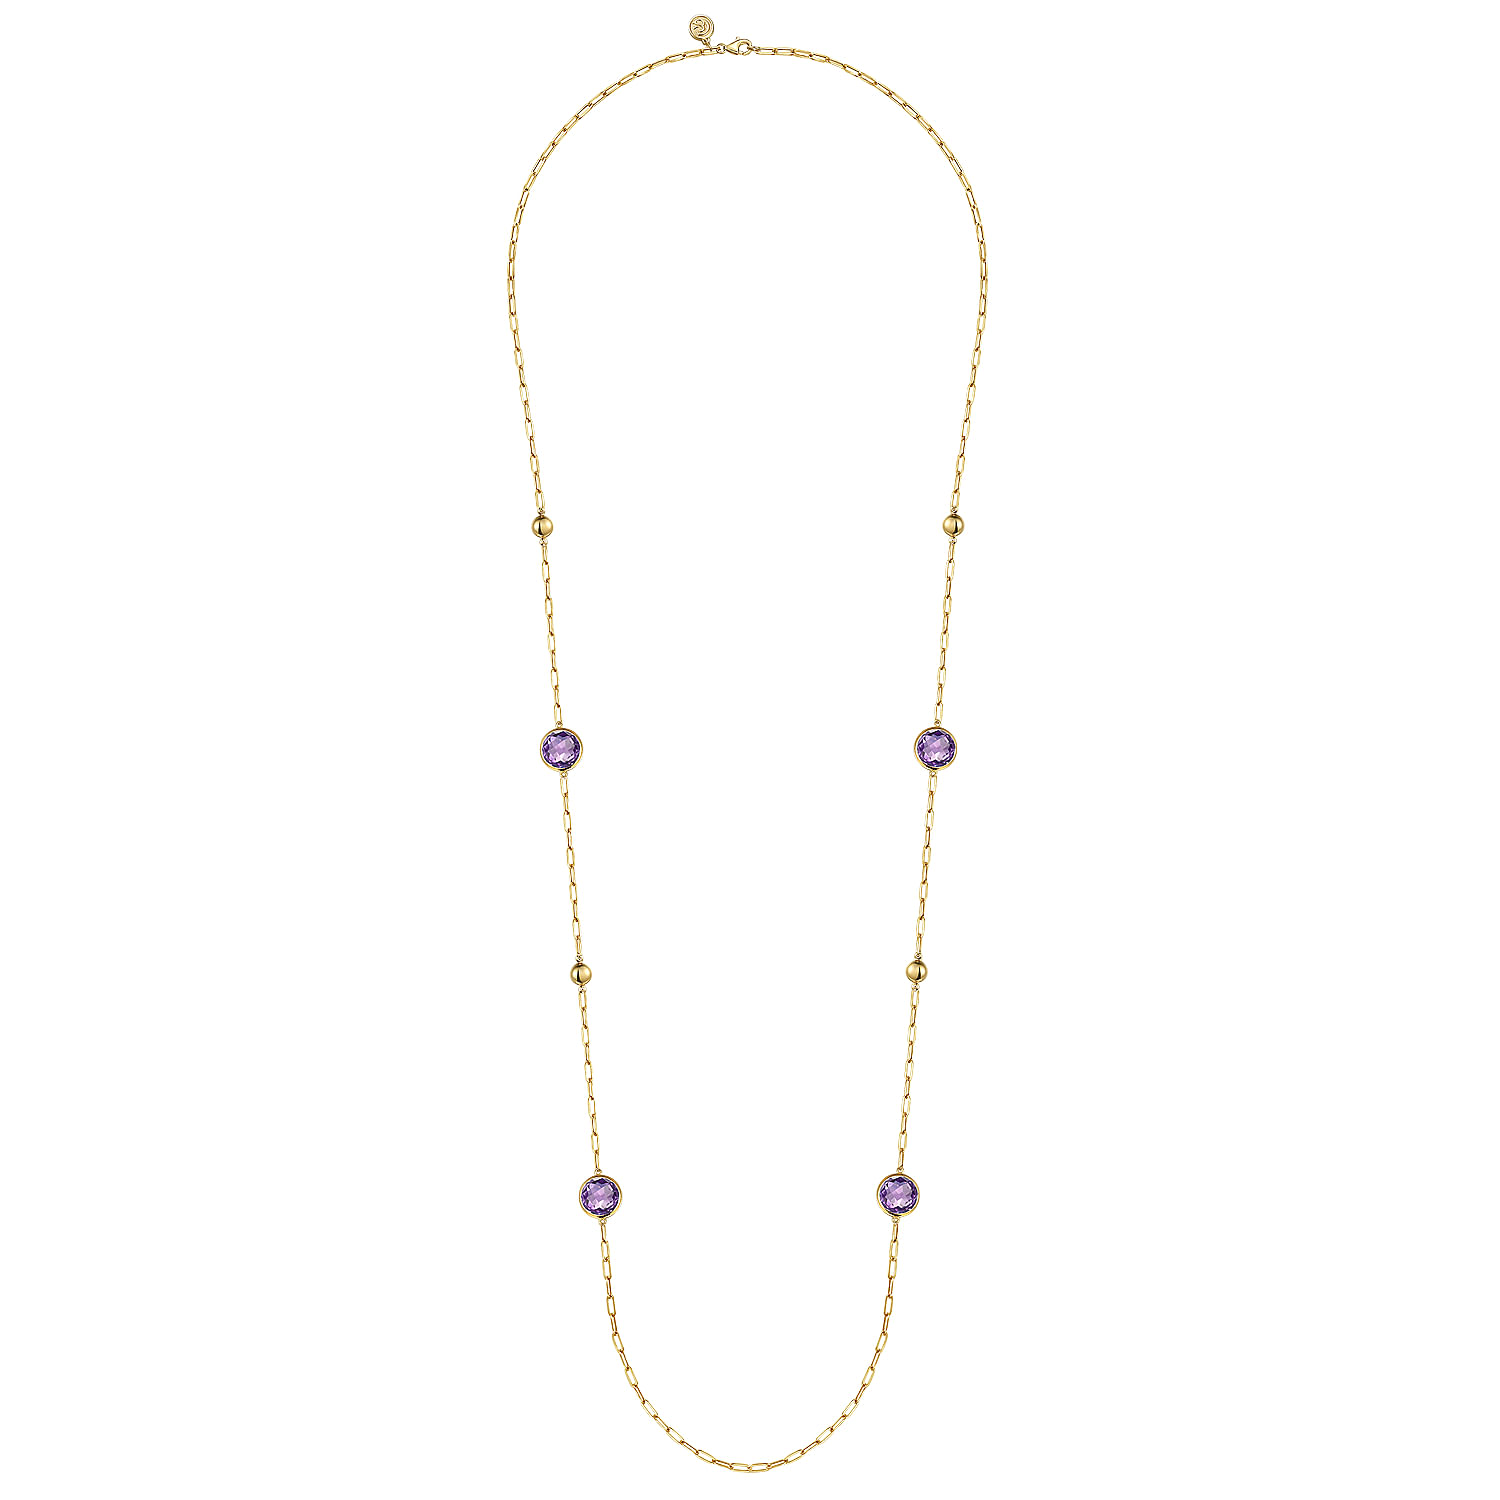 14K Yellow Gold Amethyst Round Shape Necklace With Four Stations ,Beads and Bezel Setting